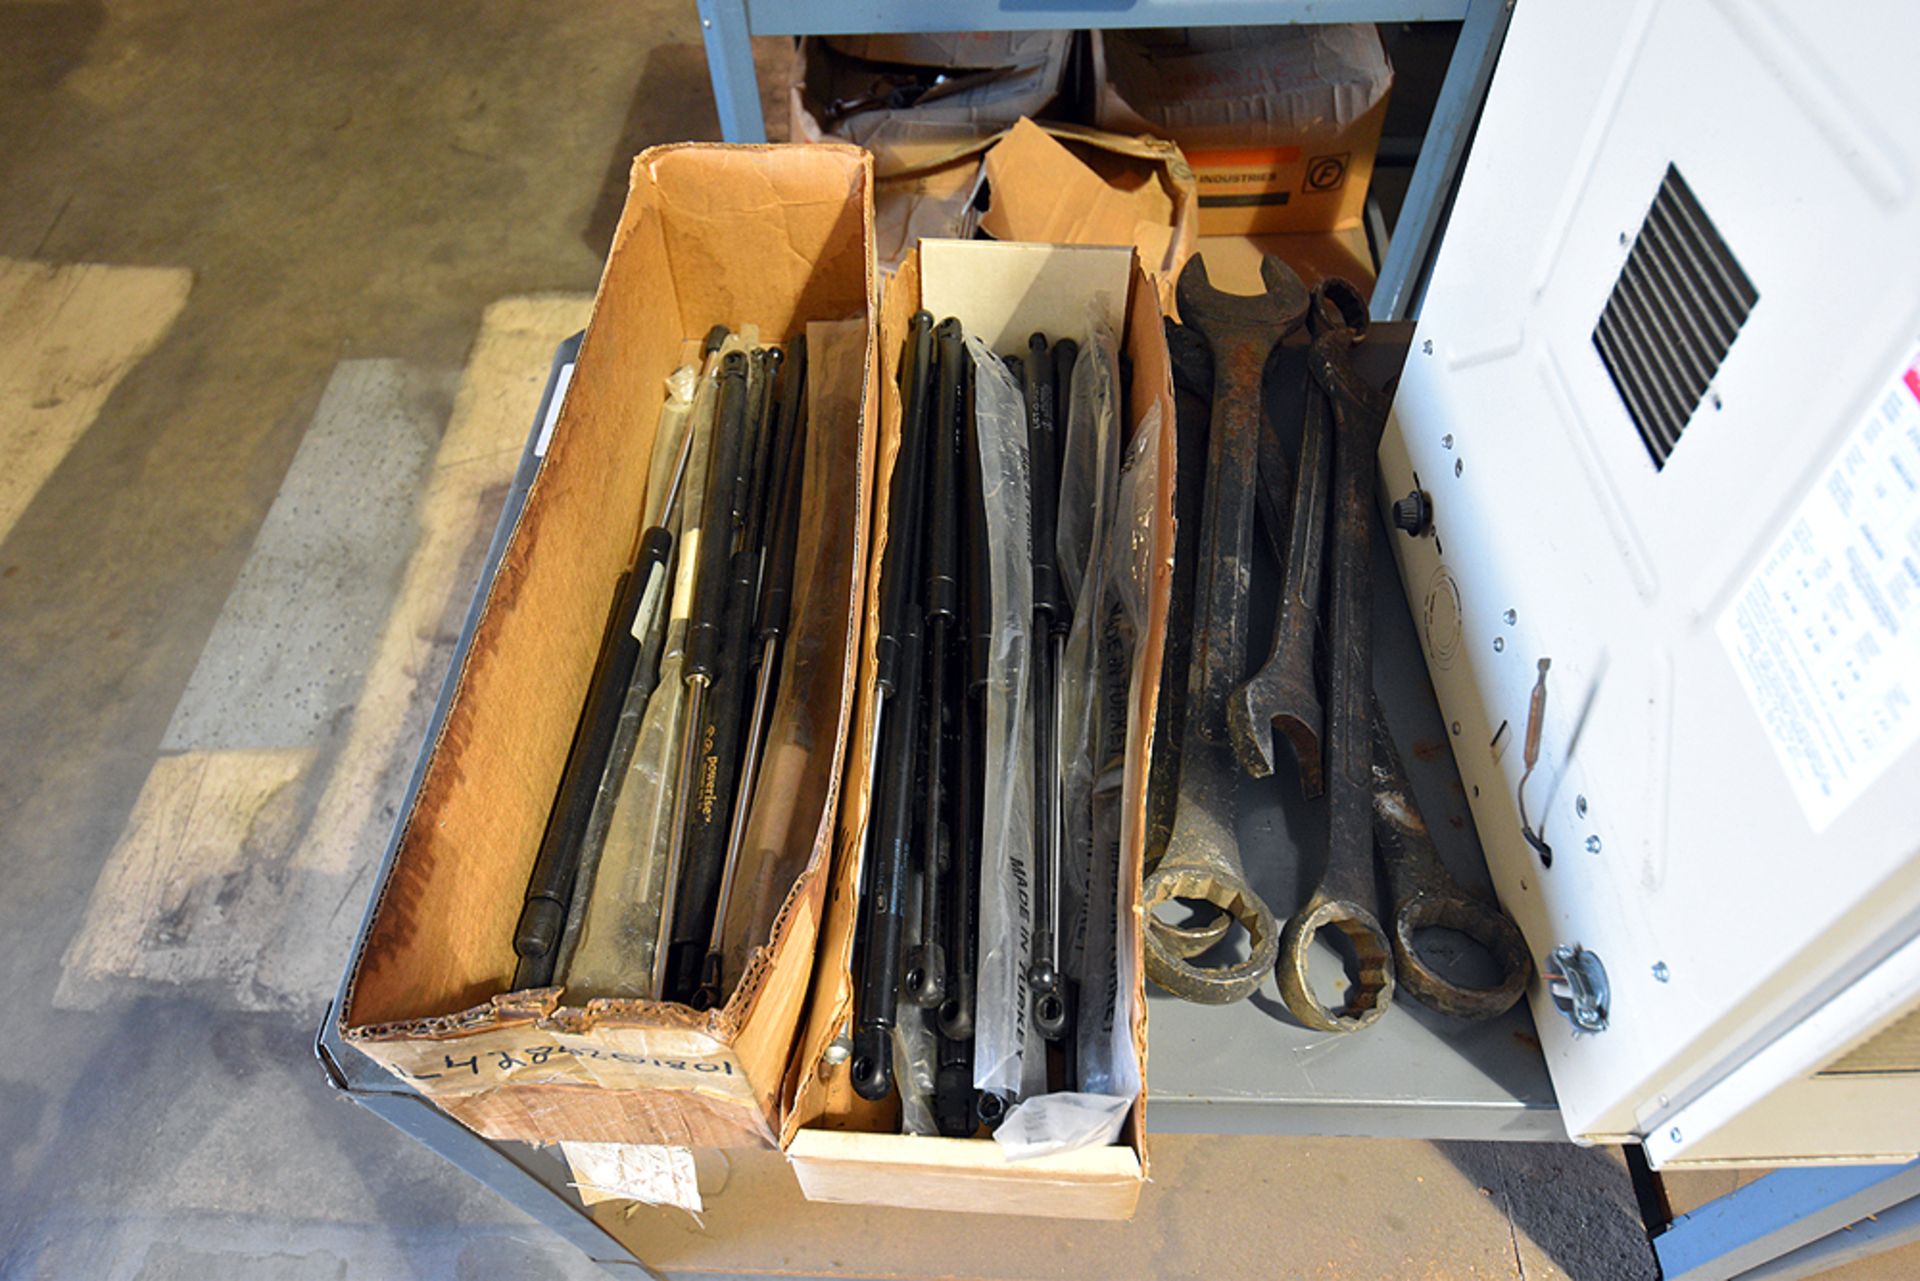 Contents of 6 tables consisting of: welding accessories, Dayton heater, Wire etc. - Image 6 of 8